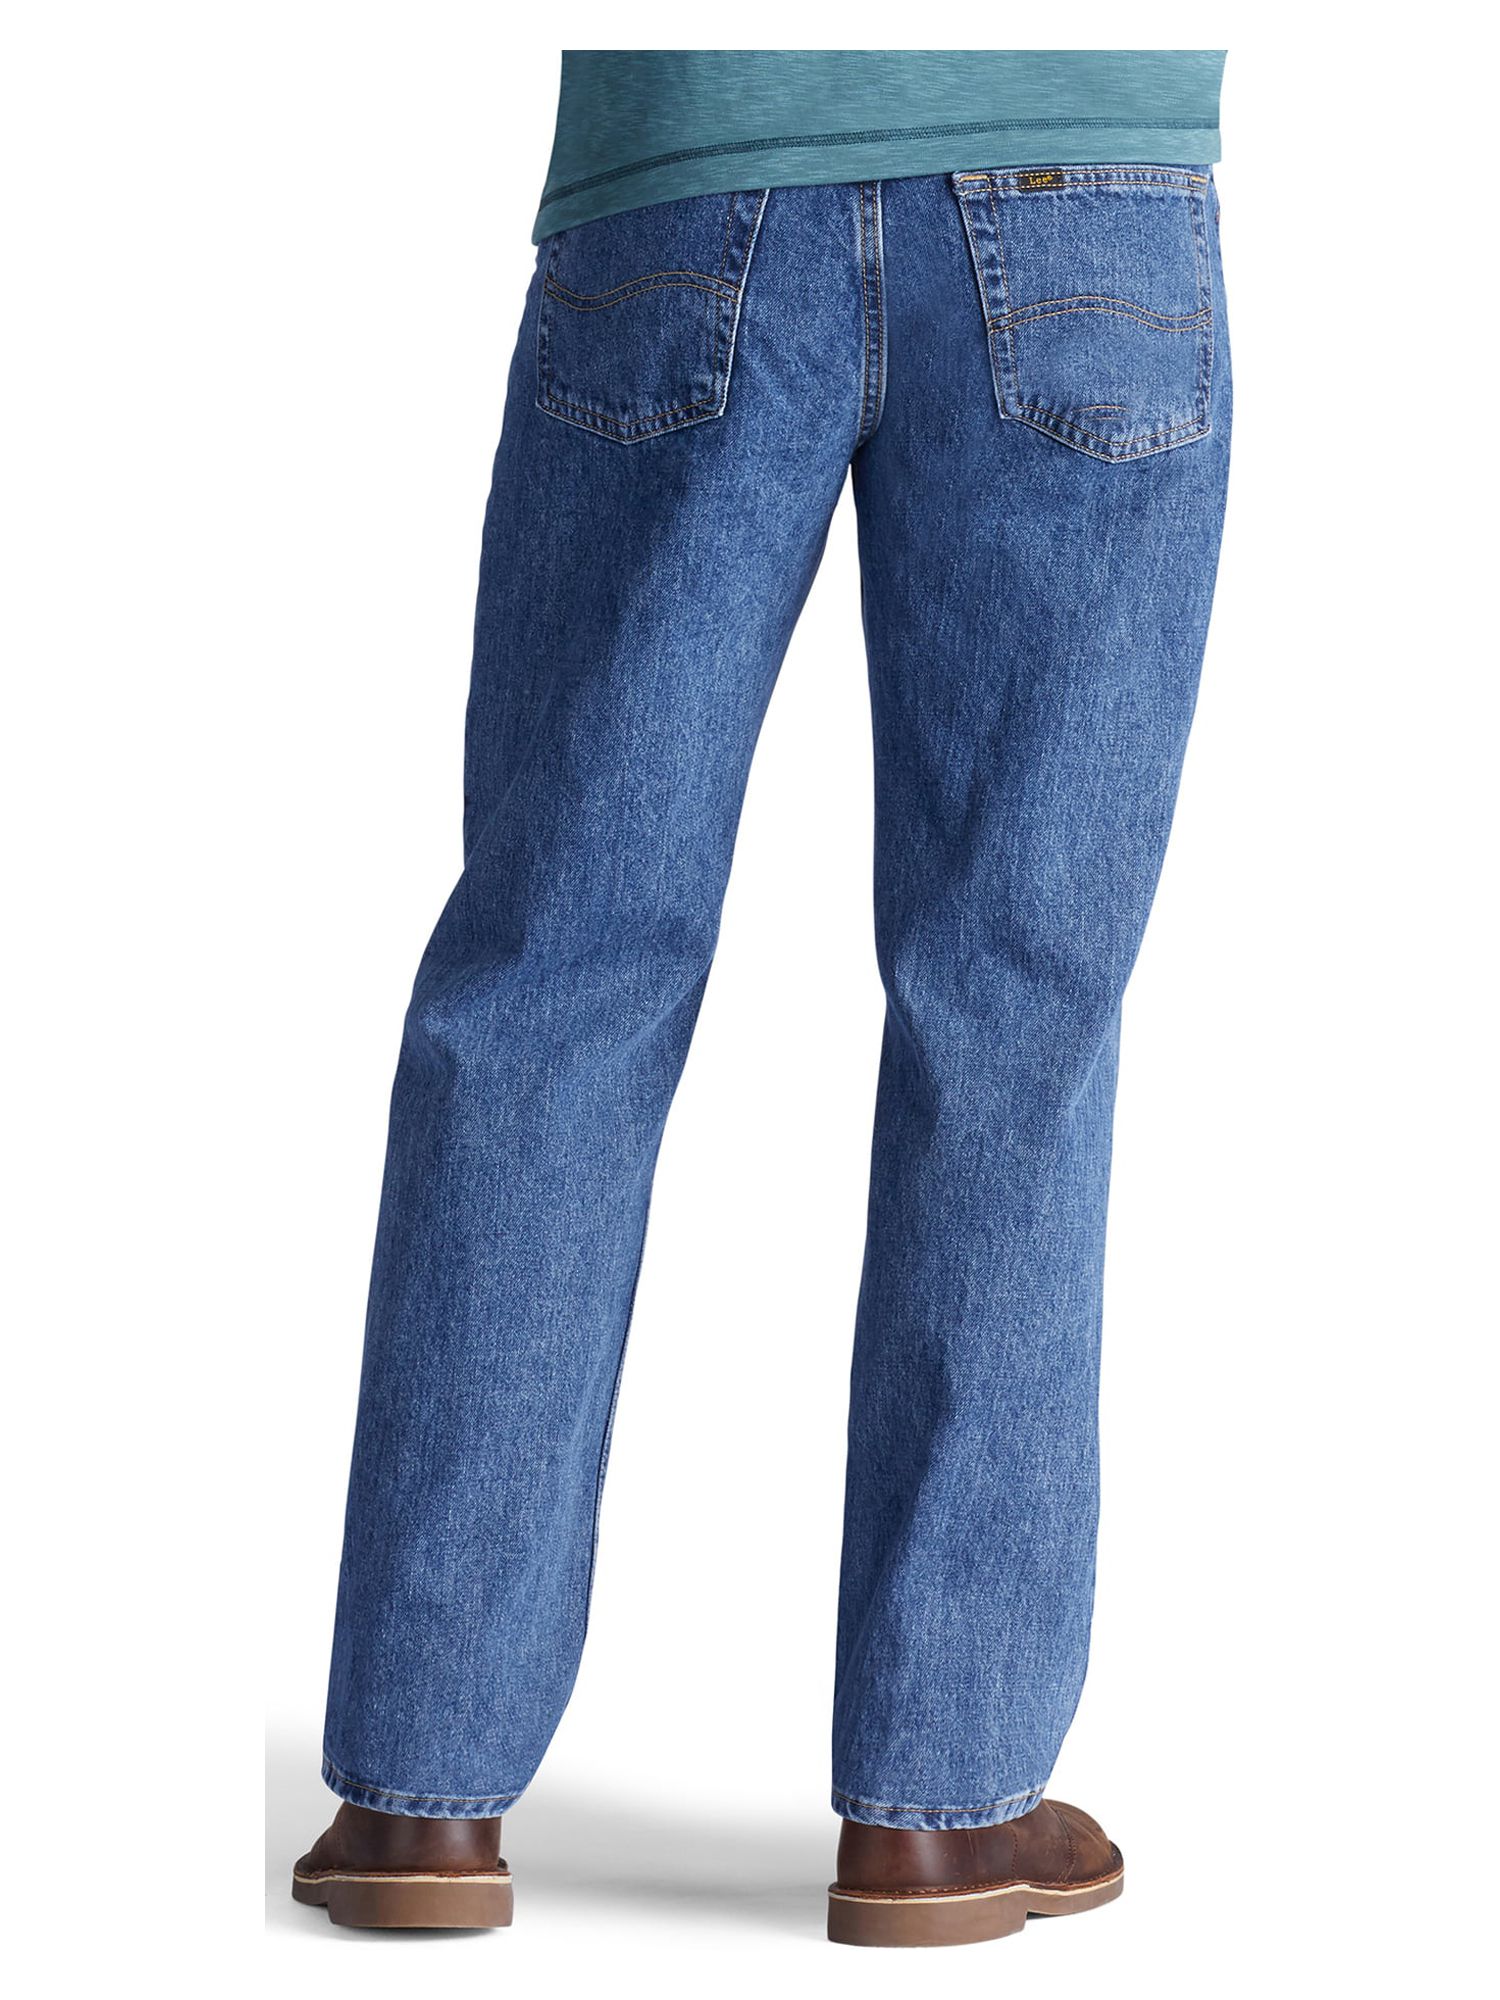 Lee Men's Relaxed Fit Straight Leg Jeans - image 2 of 3